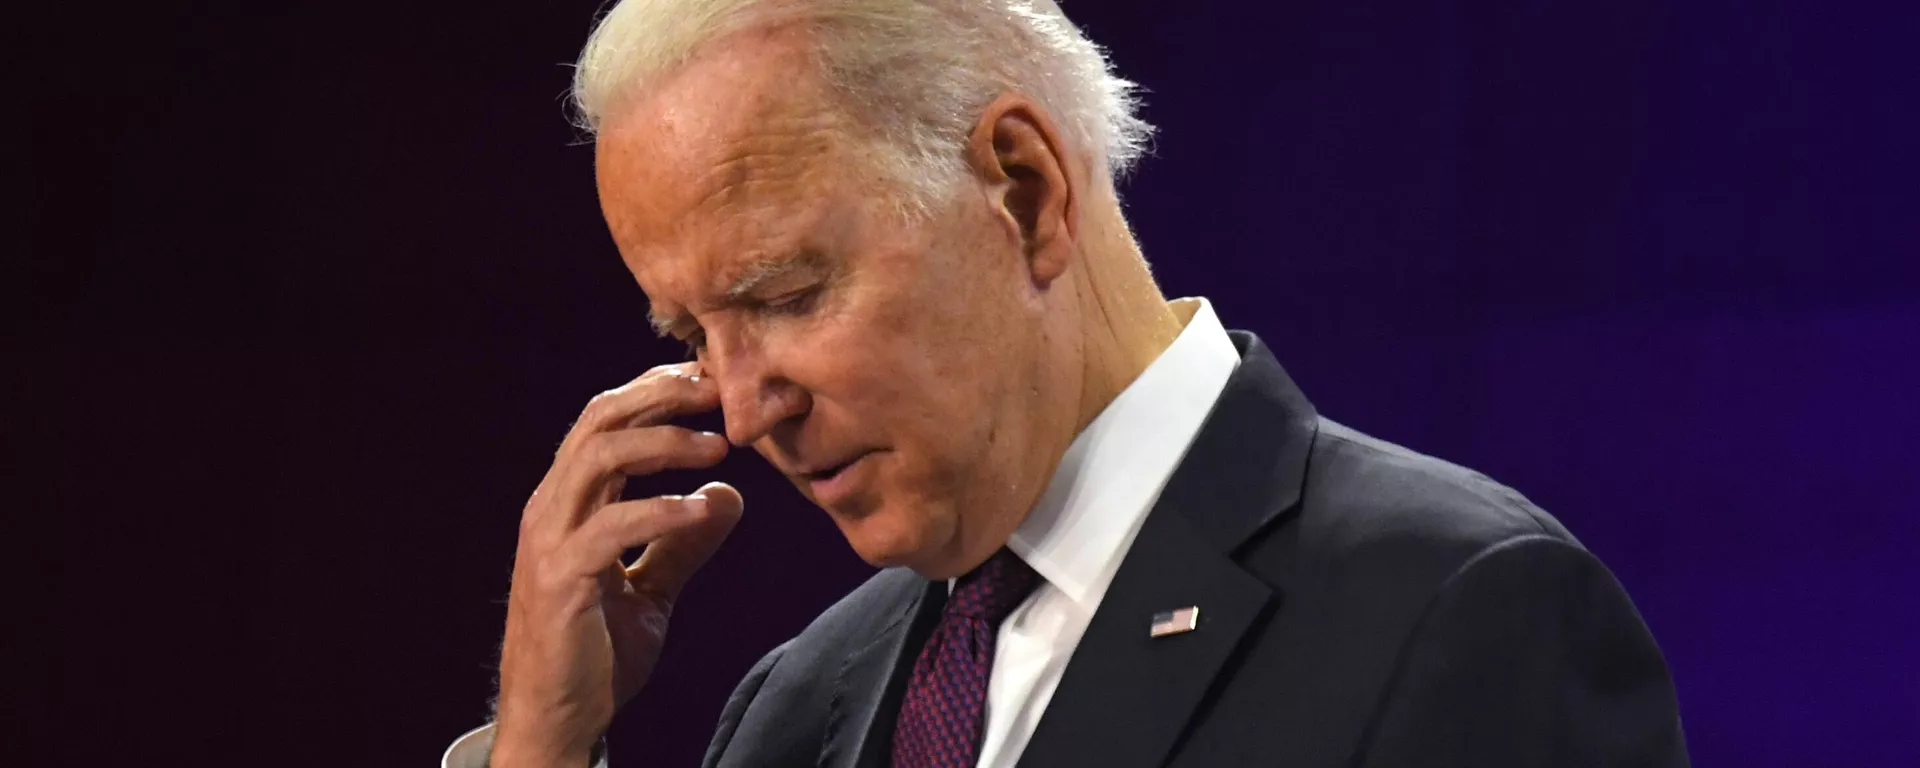 Majority of US Disapproves of Biden’s Handling of Economy, Foreign Policy – Poll